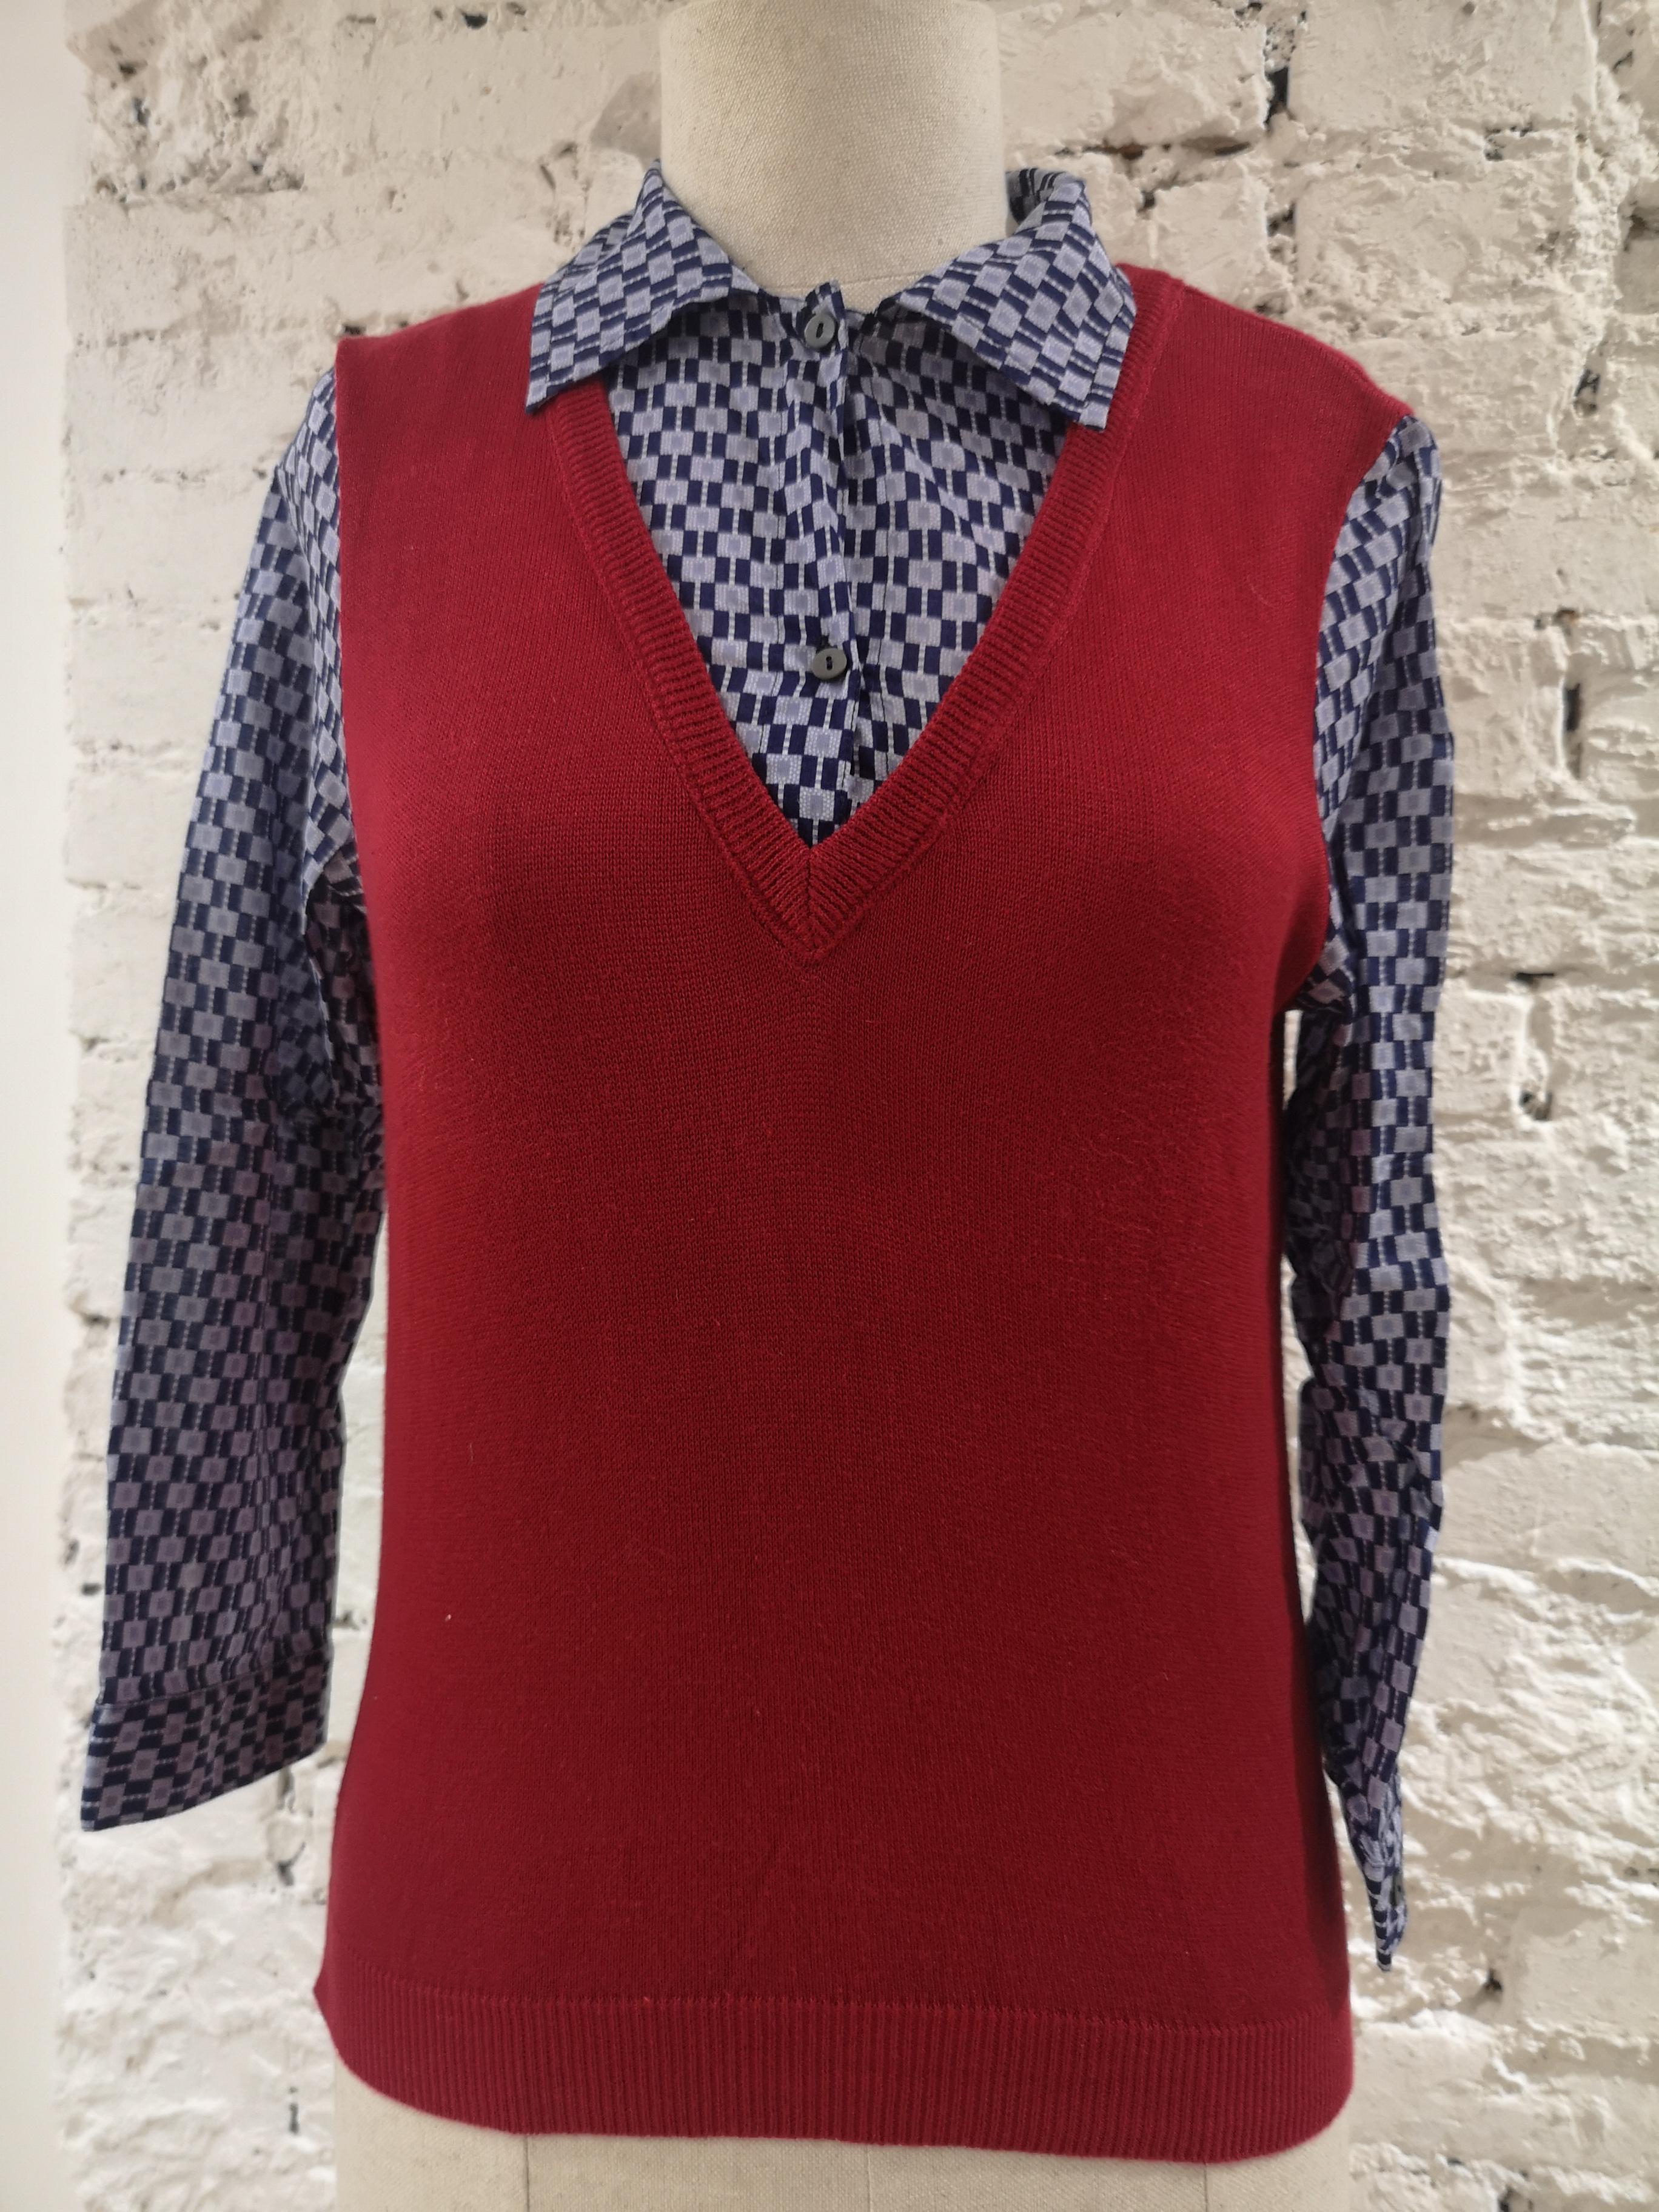 Miu Miu red and blue shirt - sweater
totally made in italy in size S